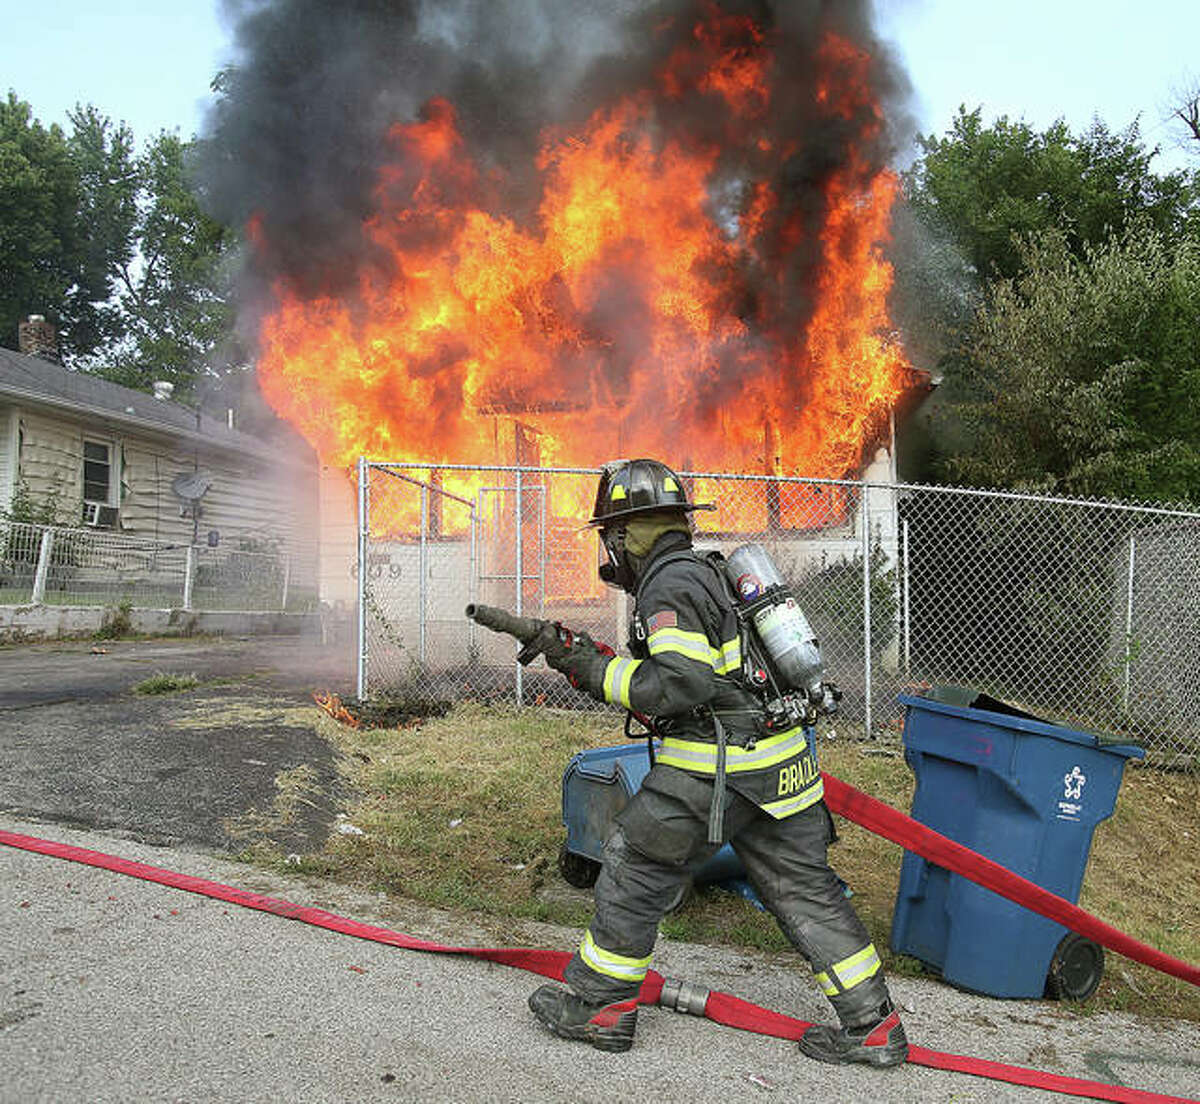 An Alton firefighter pulls a hose into position Tuesday outside 609 Marsh Avenue as flames engulf the front of the house with a young girl still trapped in the basement. It was a tense 10 minutes as firefighters worked to extinguish the fire, reach the girl and police having to restrain family members who wanted to go back in to save her. About 10 minutes into the fire the girl was rescued, virtually uninjured, by Alton firefighters.